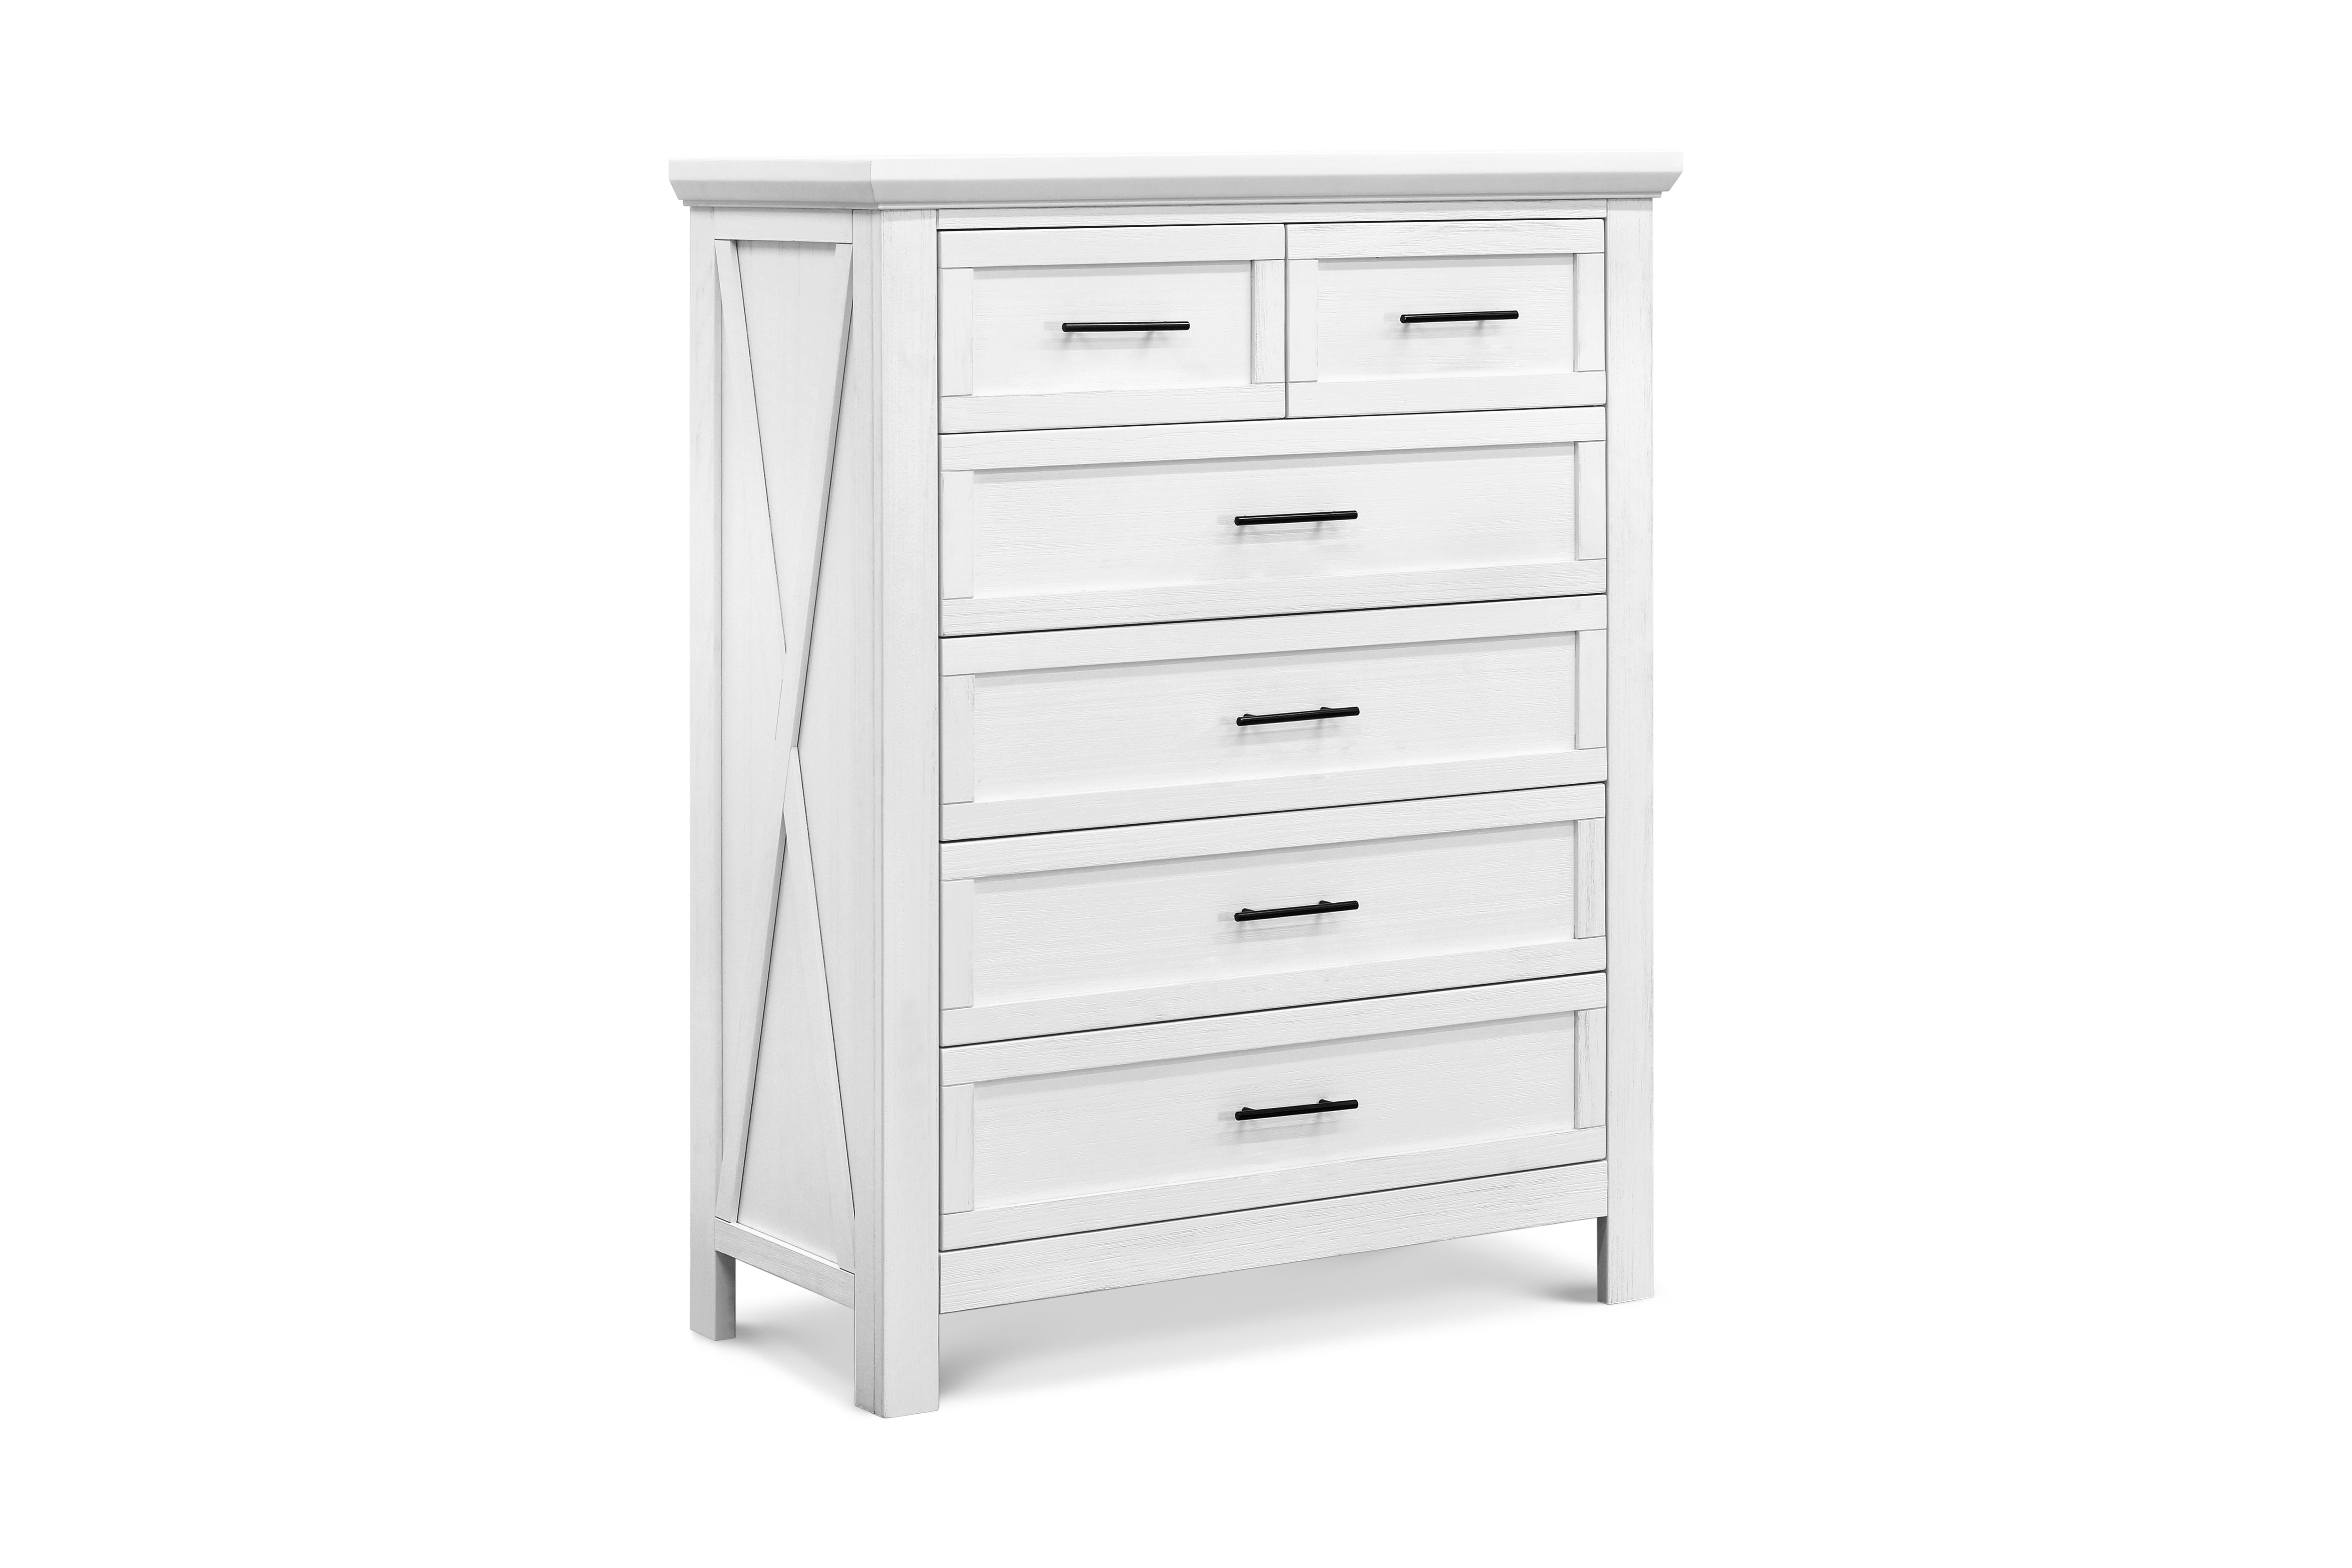 Emory chest in linen white